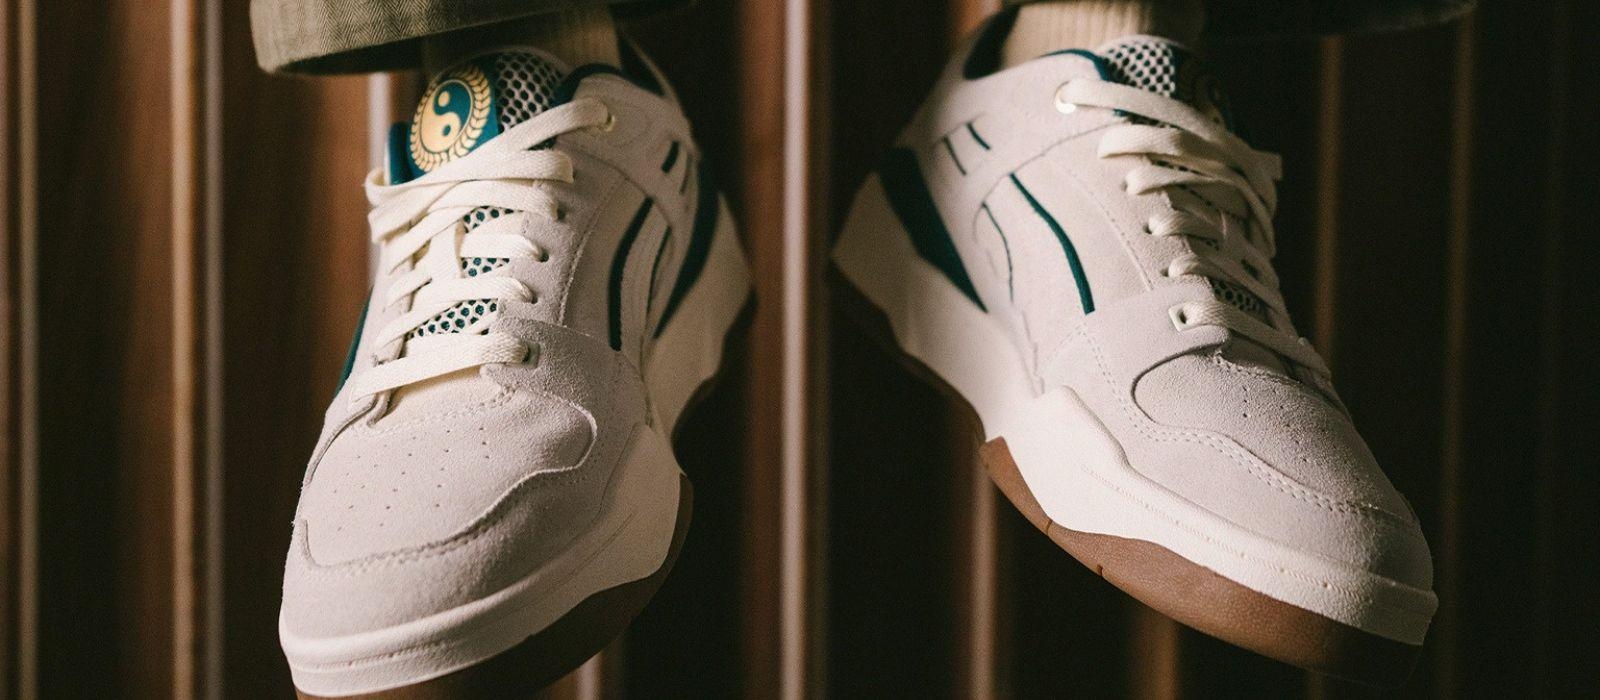 PUMA x STAPLE “EAST WEST IVY” COLLECTION